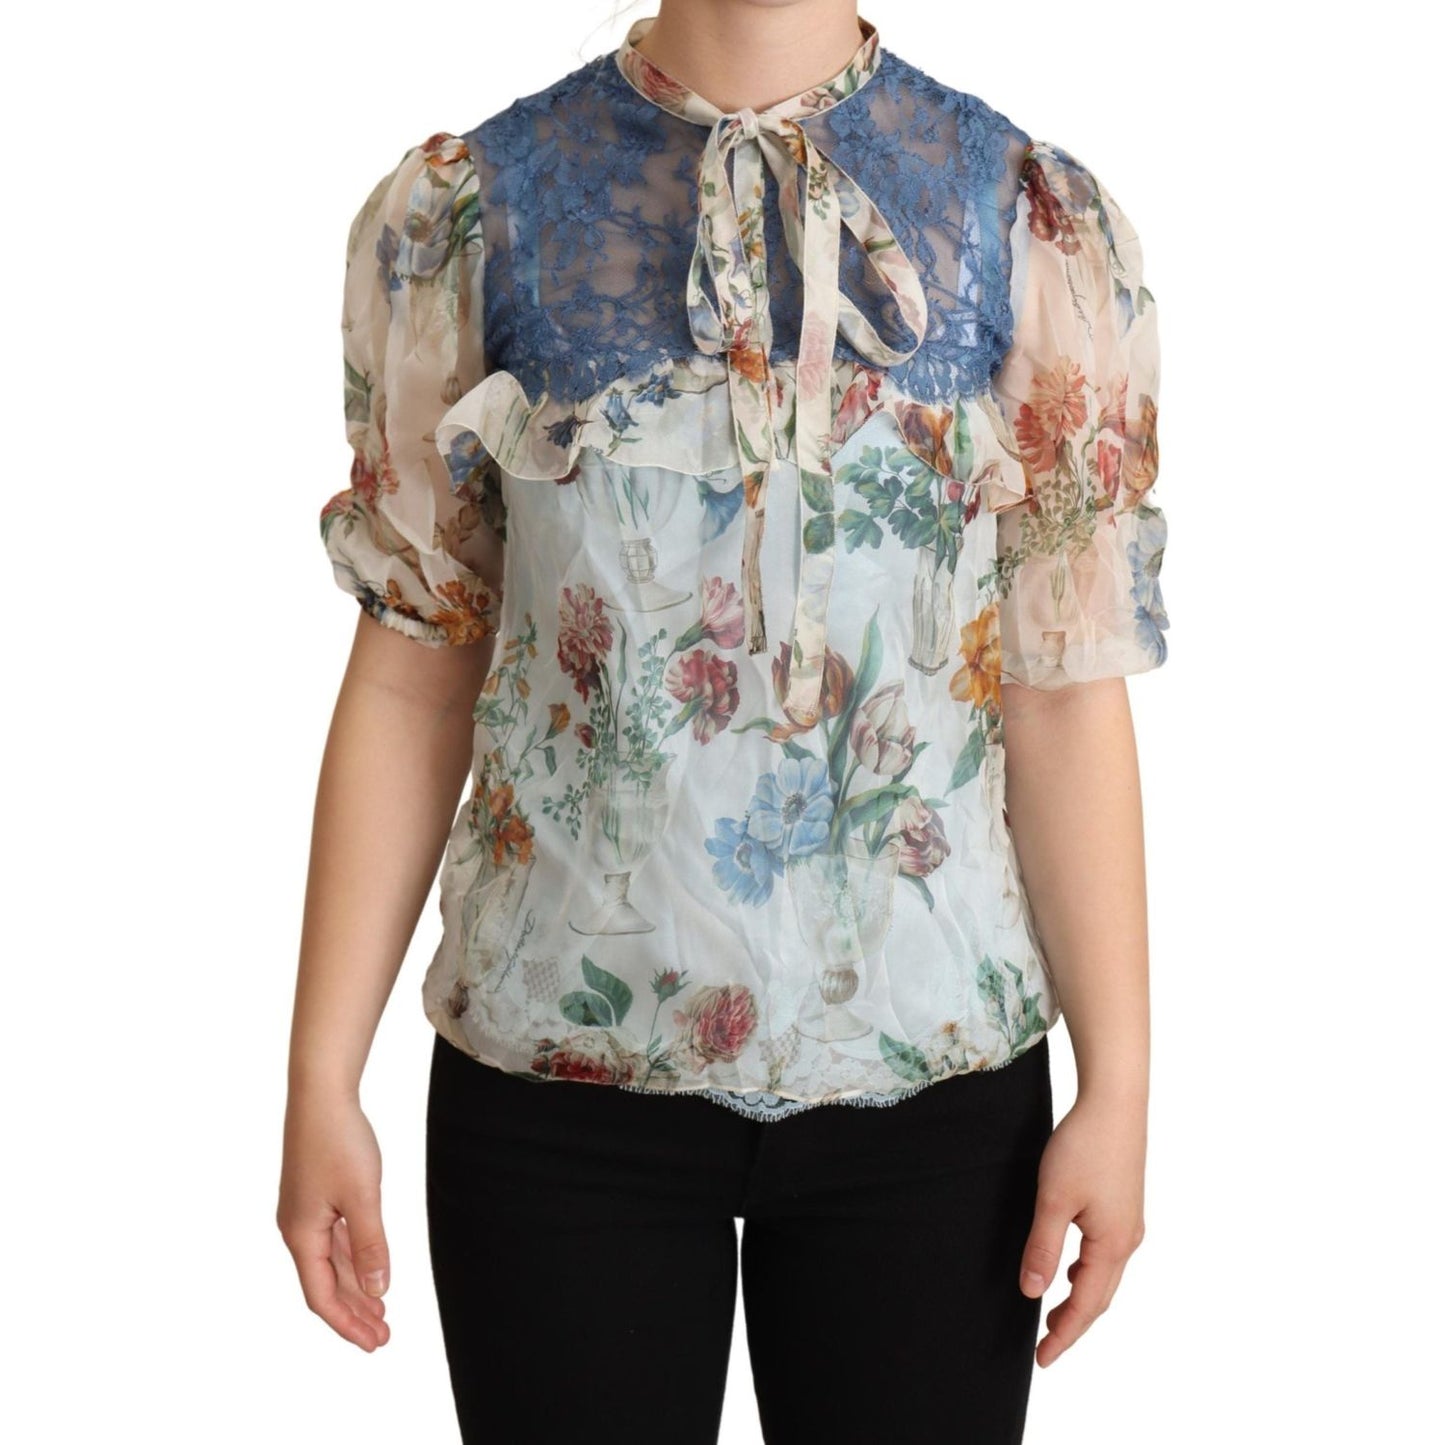 Dolce & Gabbana Chic Floral Silk Blouse with Ascot Collar chic-floral-silk-blouse-with-ascot-collar